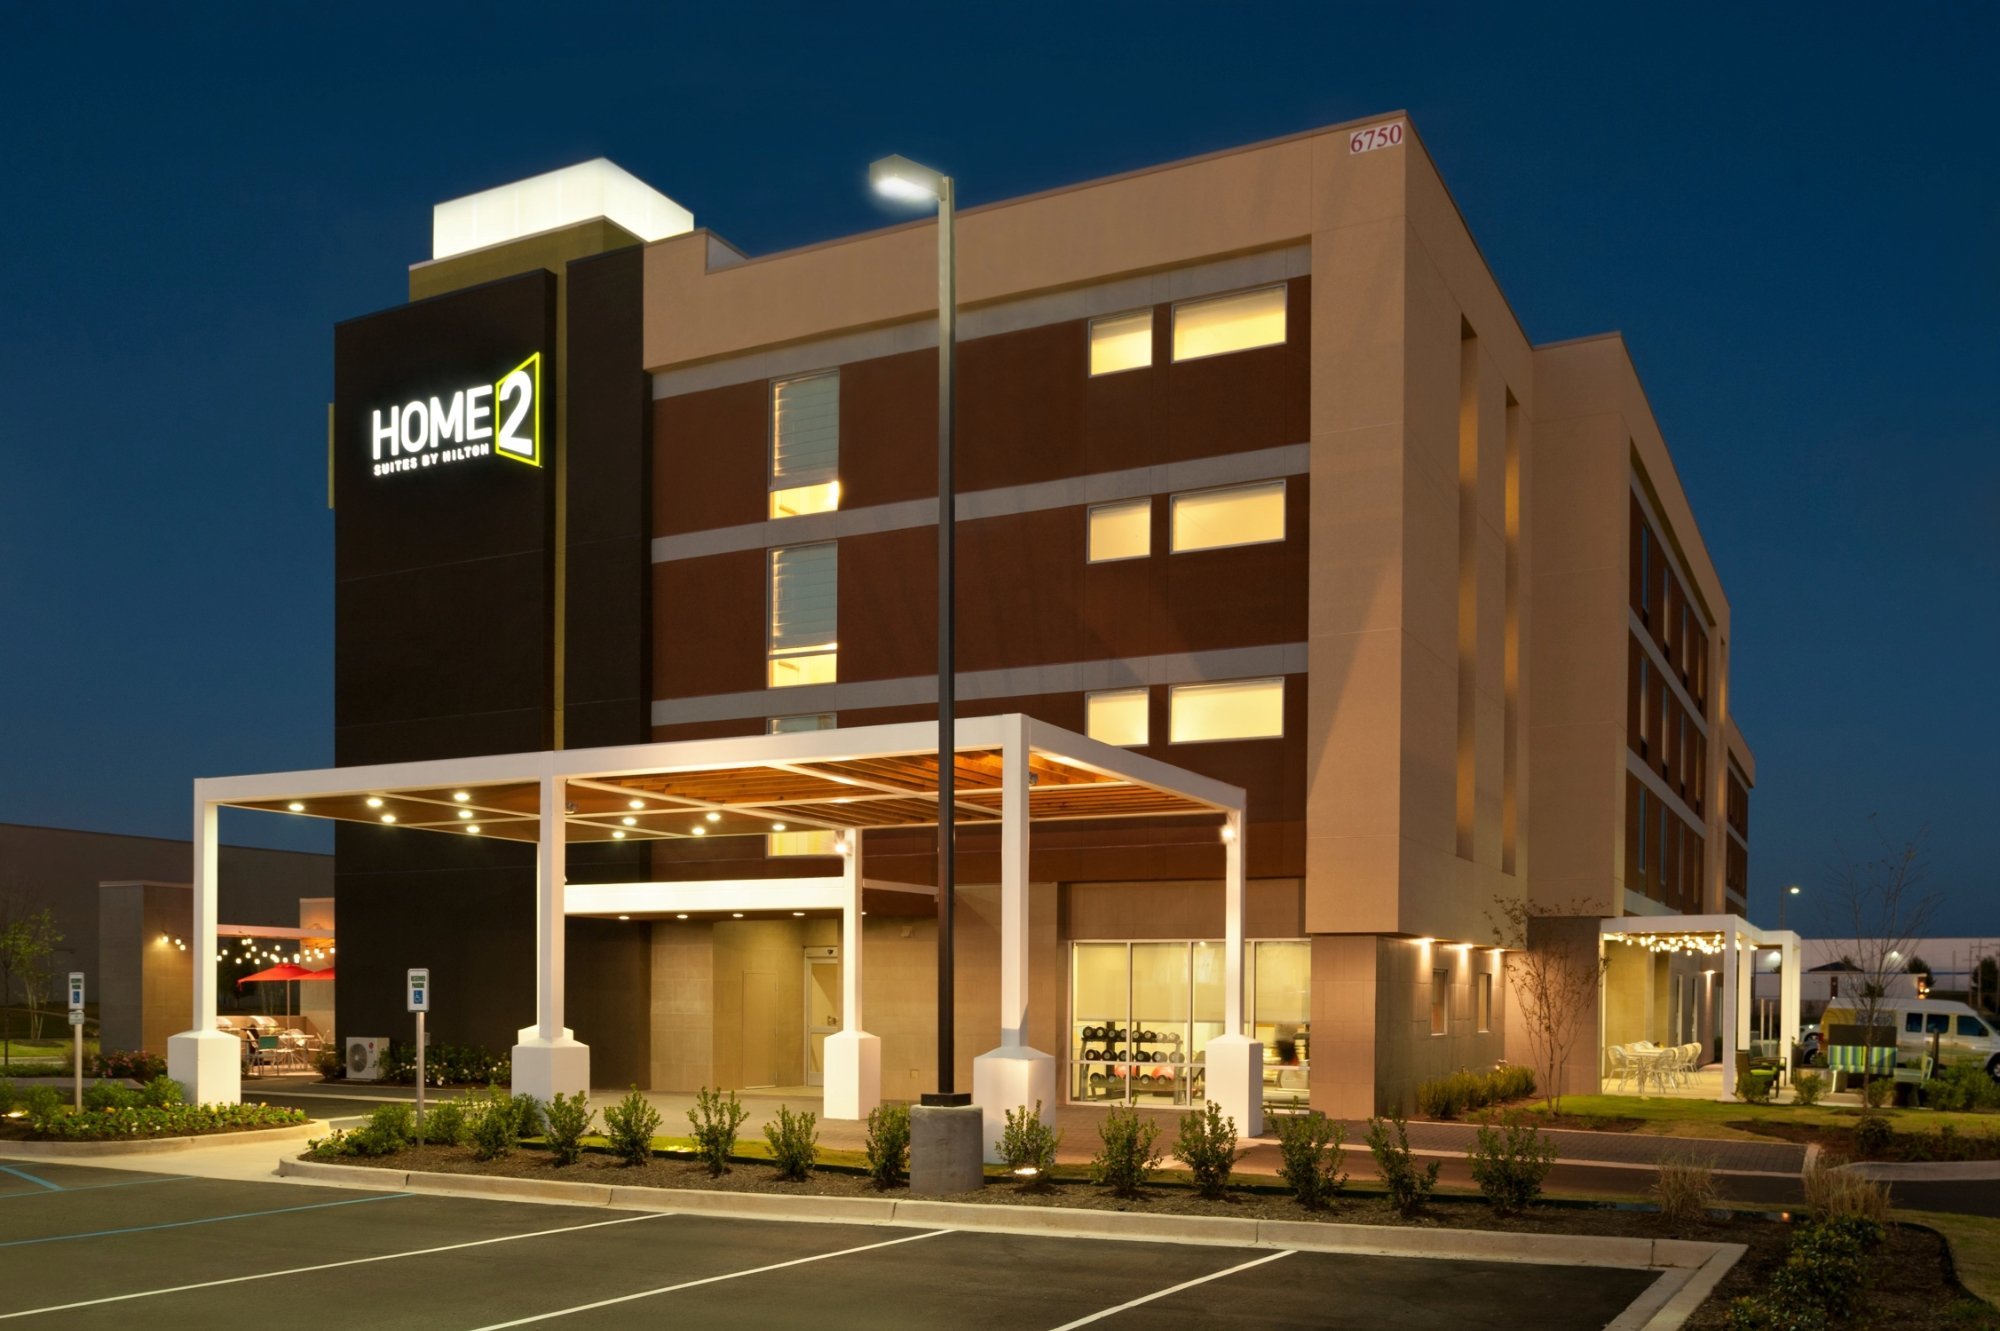 Photo of Home2 Suites by Hilton Memphis-Southaven, Southaven, MS